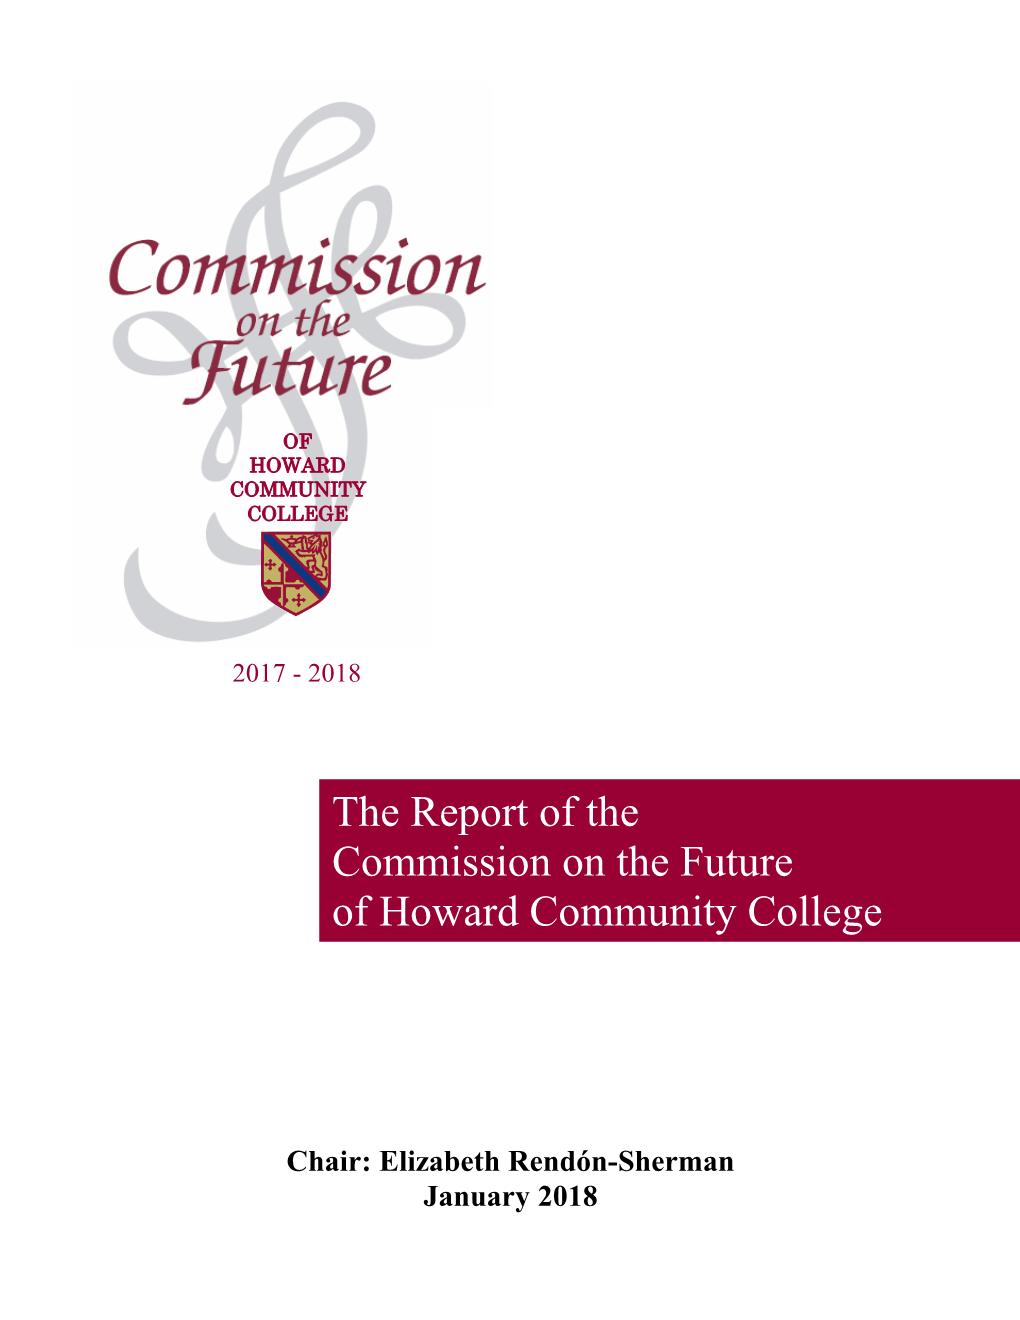 The Report of the Commission on the Future of Howard Community College